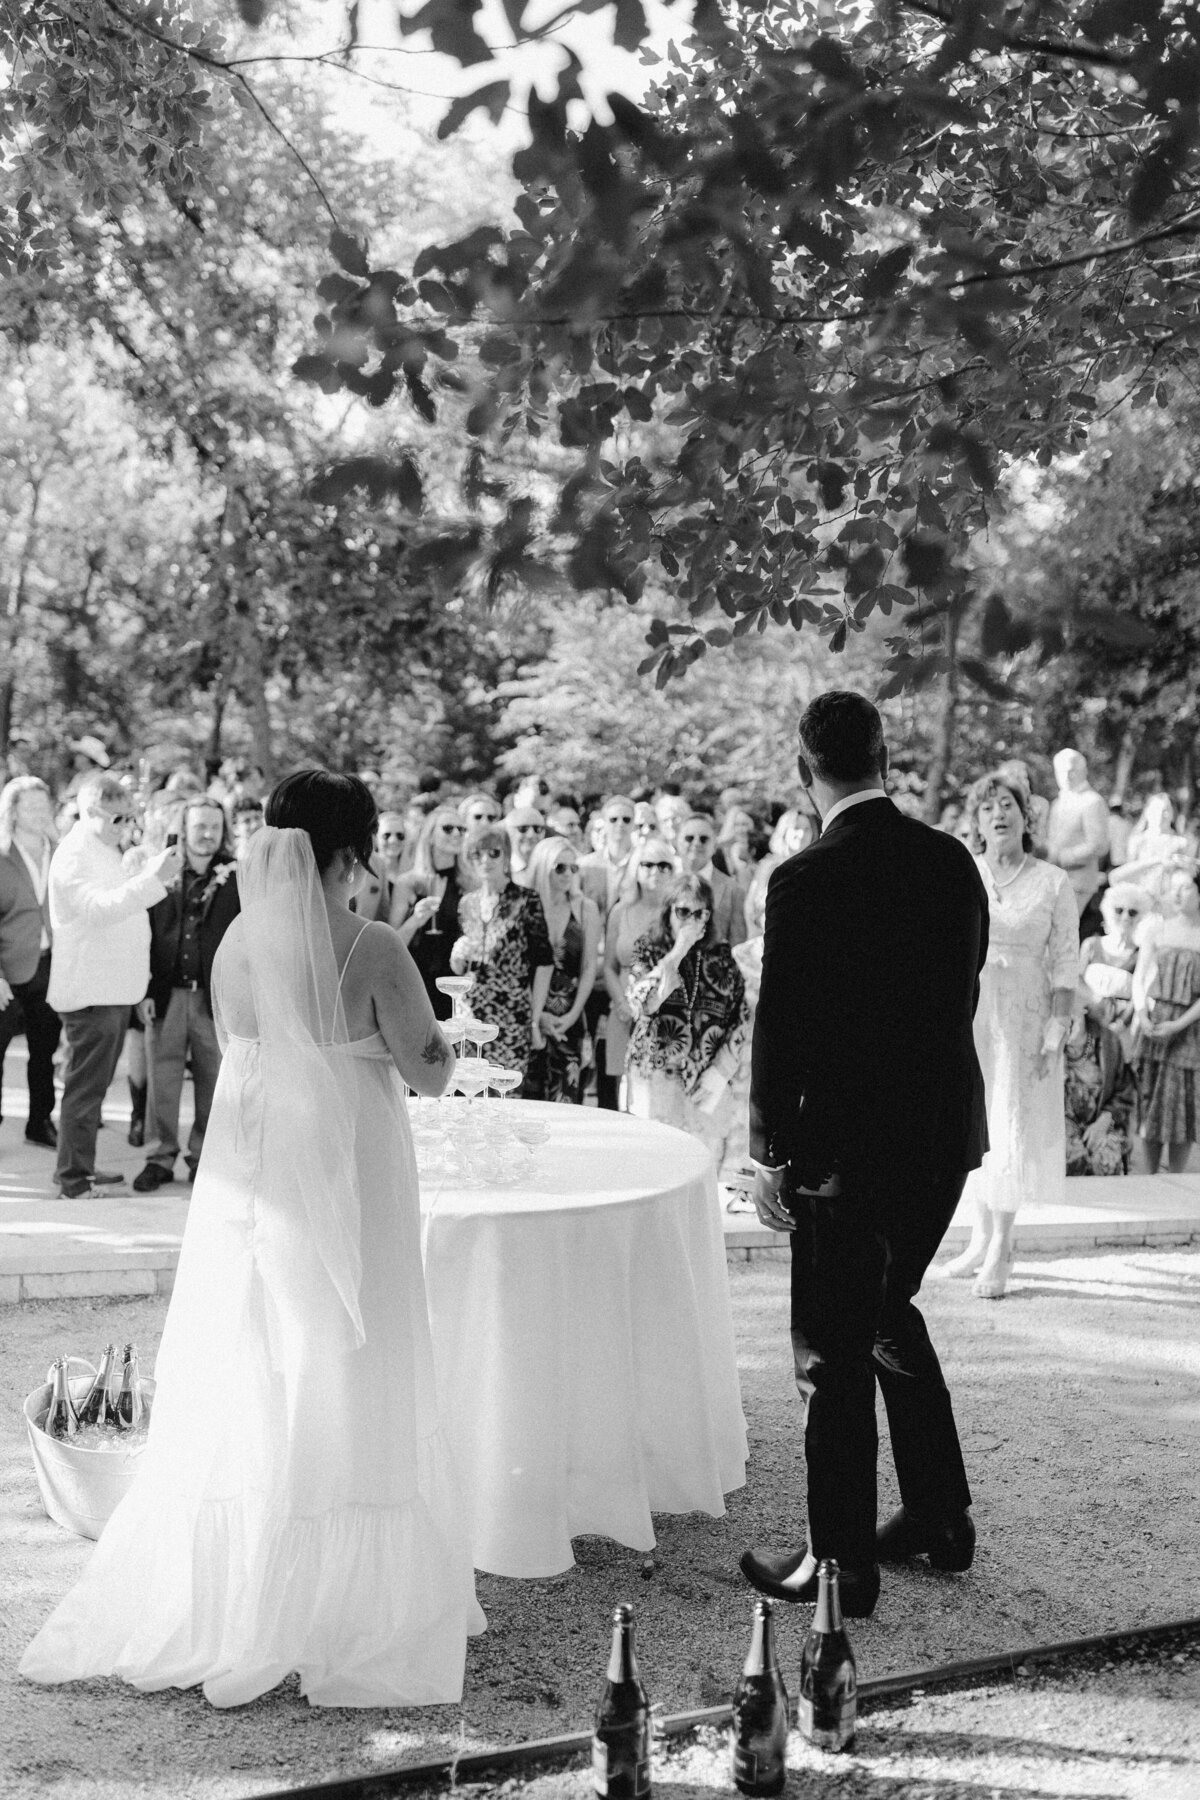 Bride and groom standing next to champagne bottles